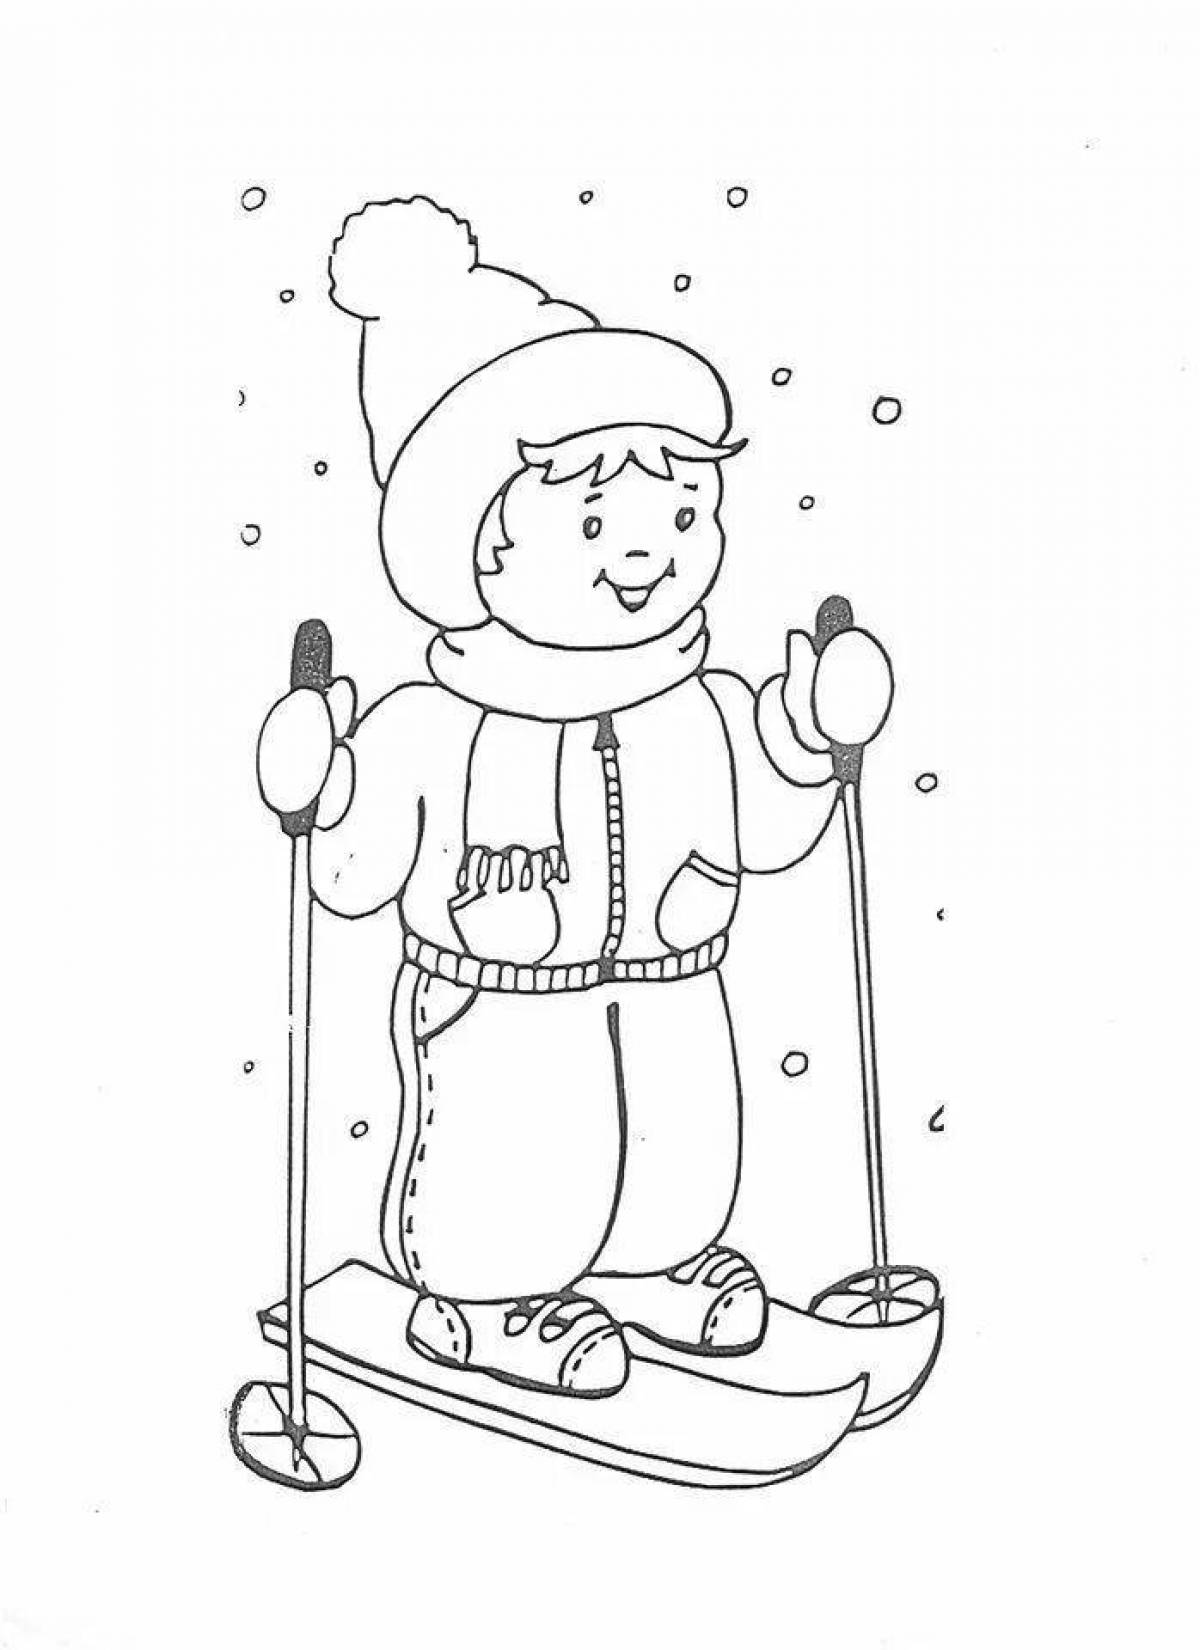 Animated coloring book for children winter 2 3 years old